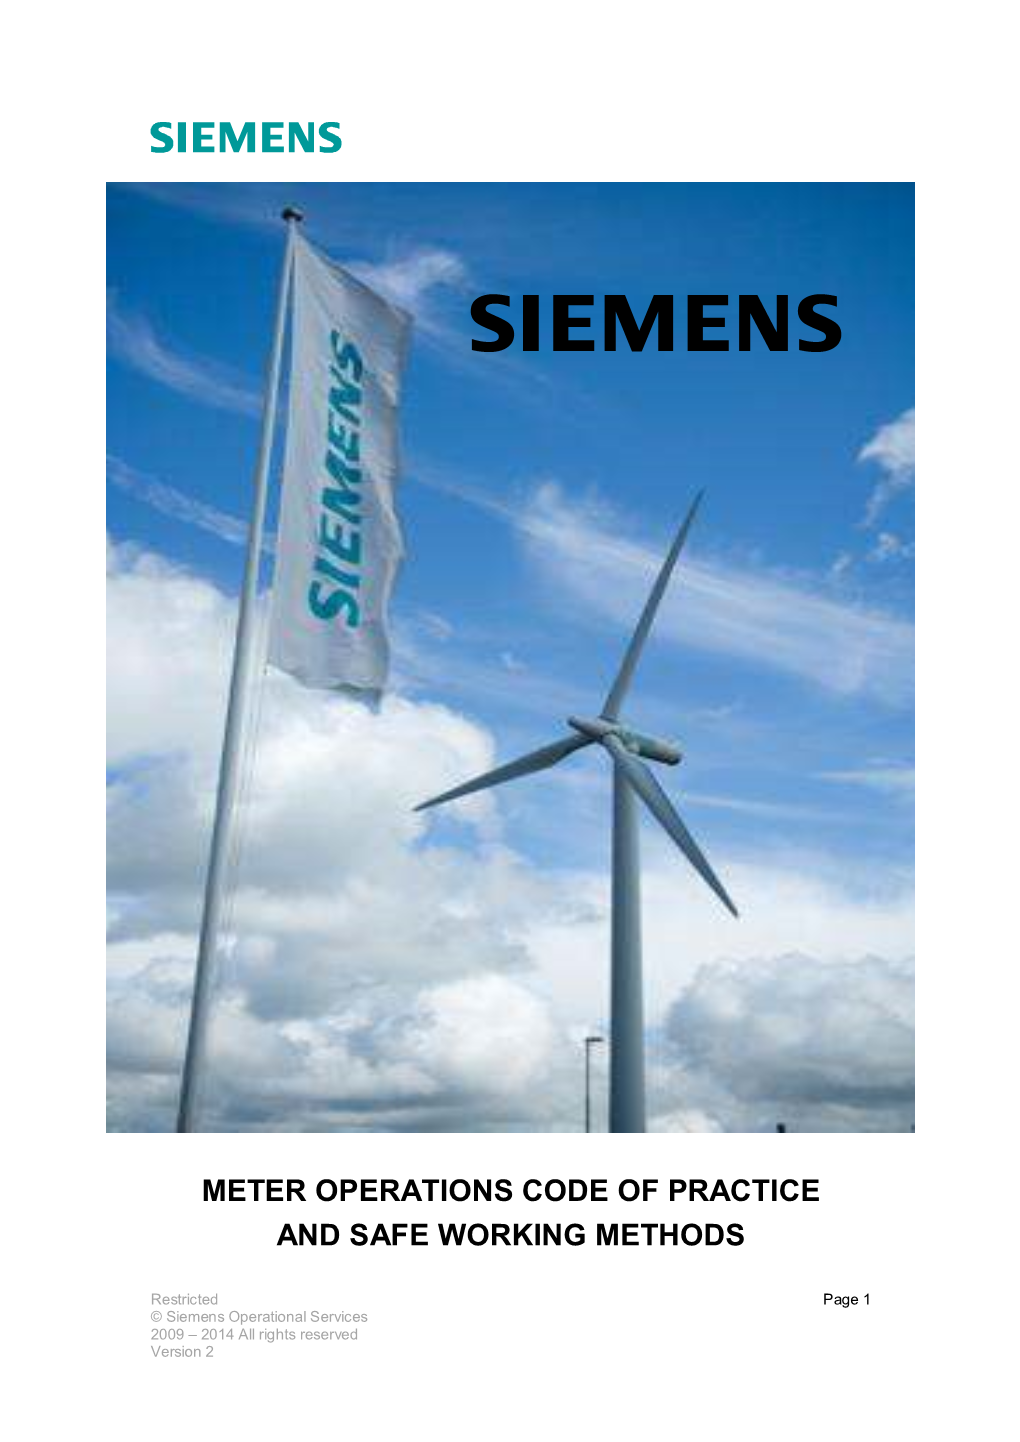 Meter Operations Code of Practice and Safe Working Methods